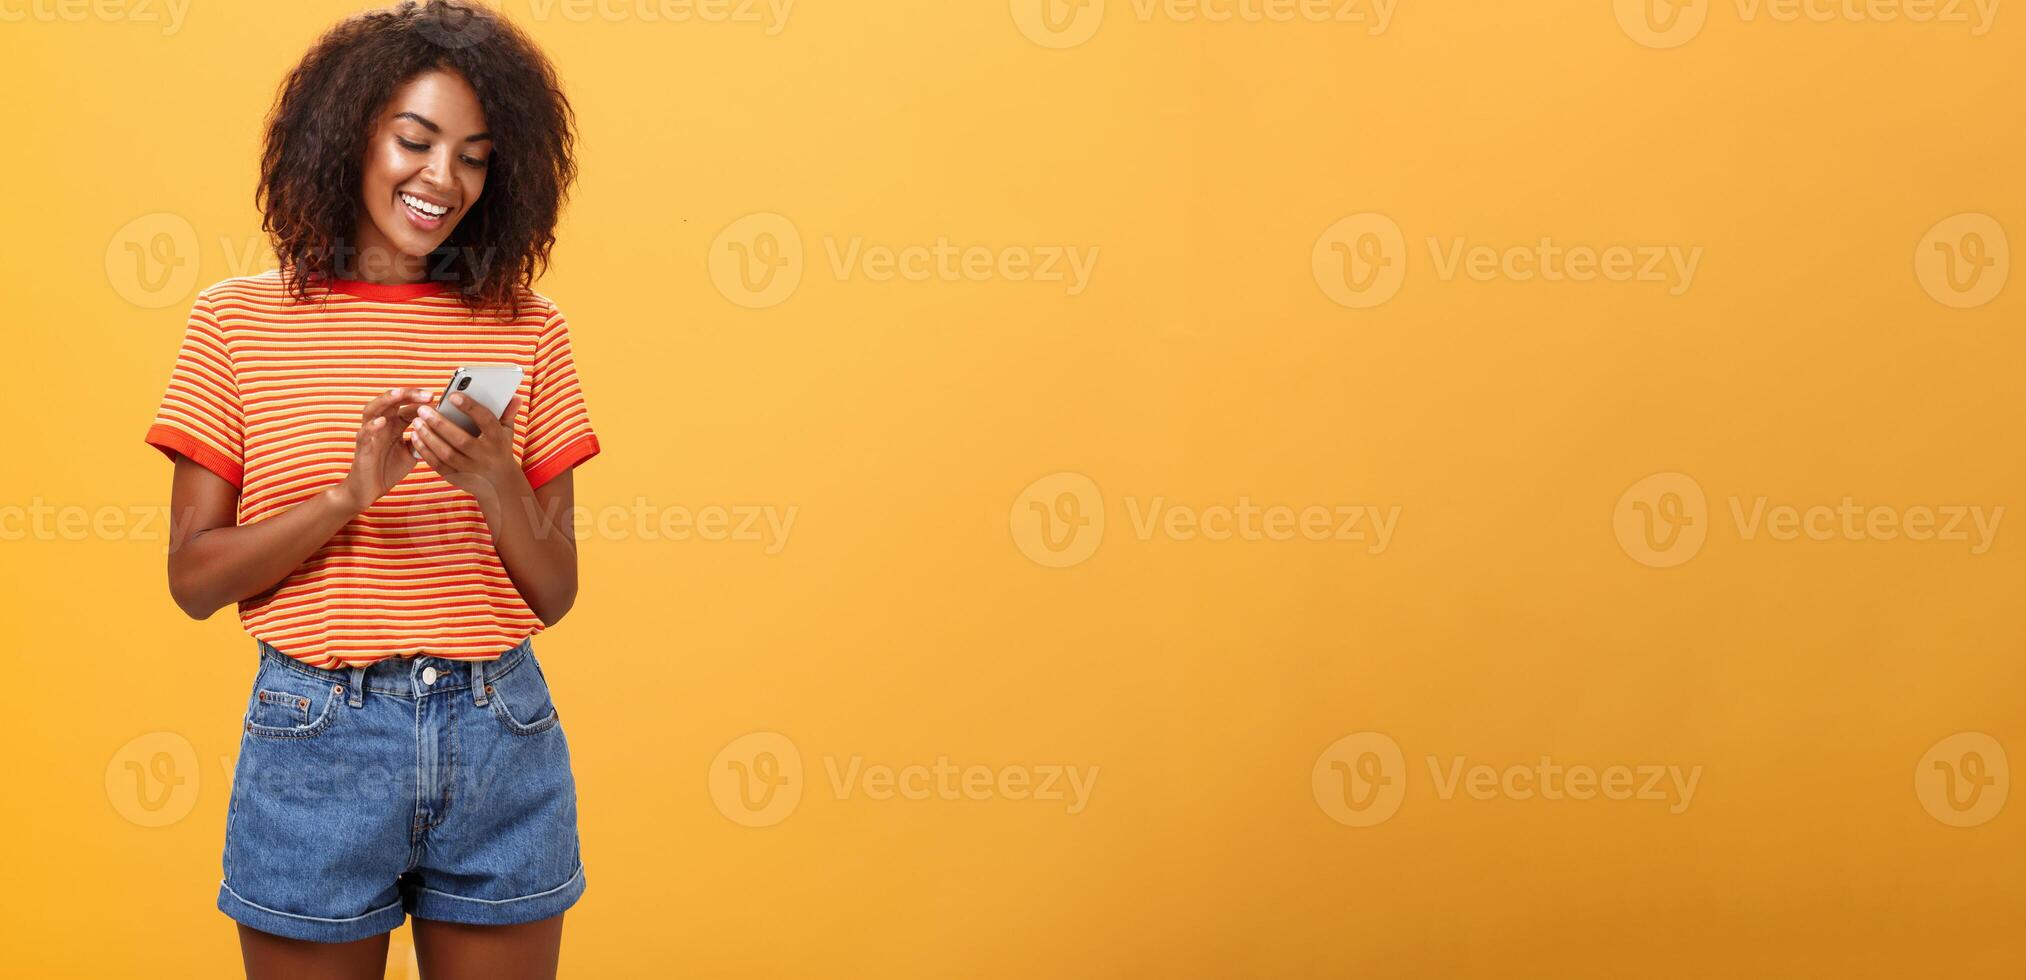 Stylish carefree girl texting friend come over standing pleased over orange wall in stylish denim shorts typing message or scrolling news in internet via smartphone gazing at device screen with smile photo